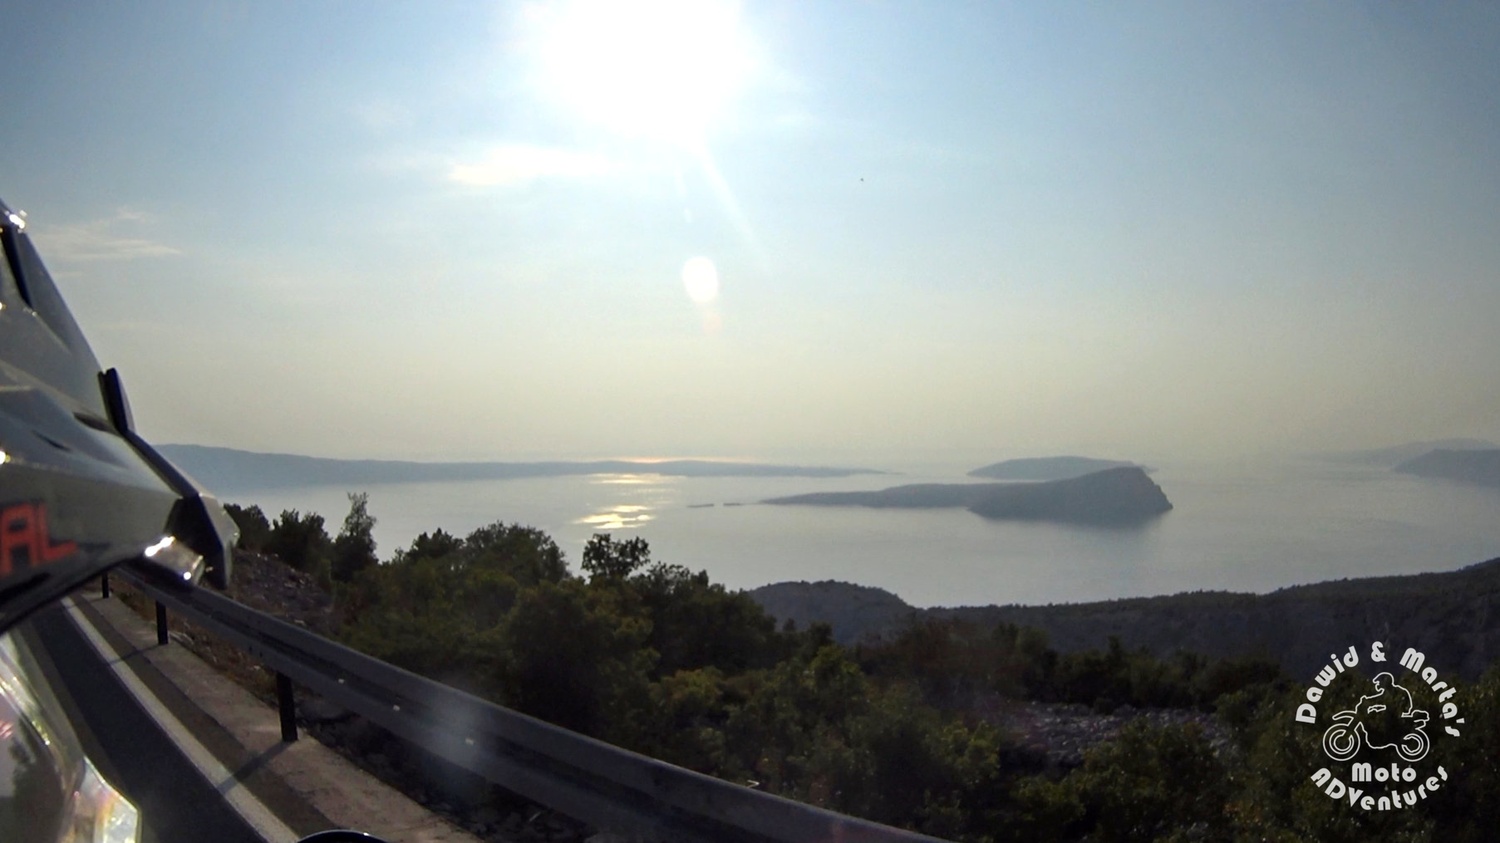 View from the Adriatic Highway on the Adriatic Sea